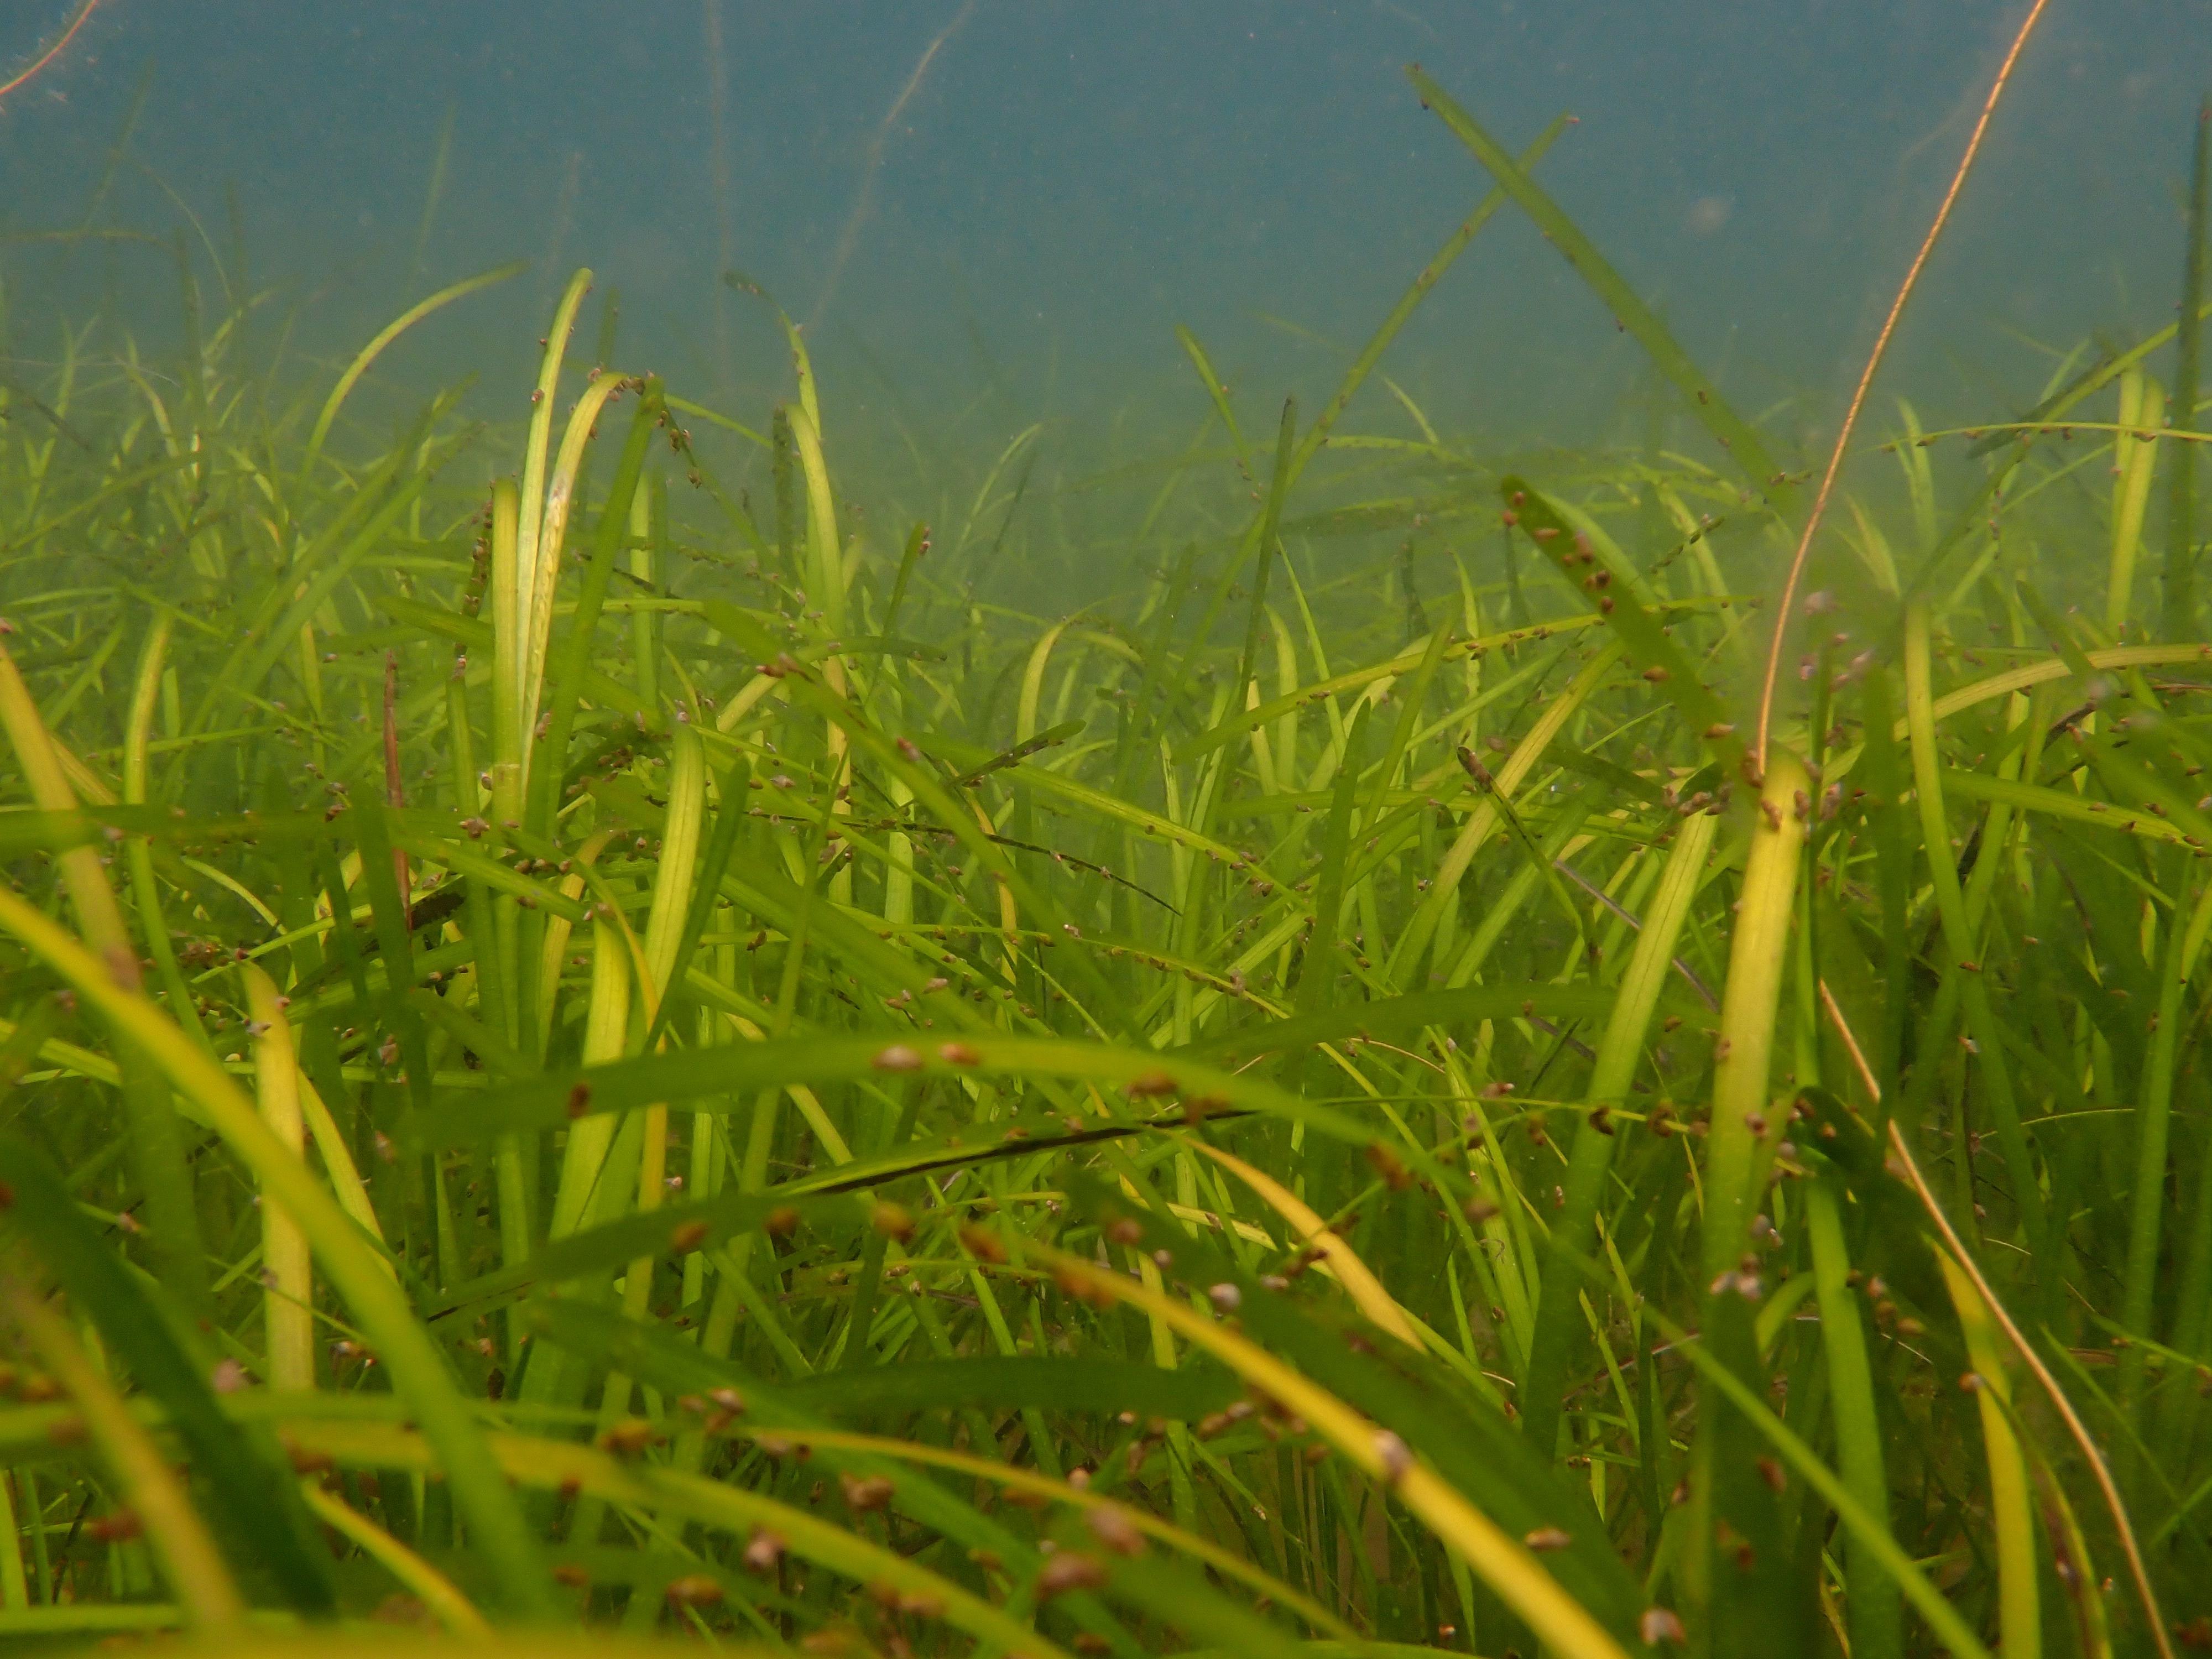 Underwater seagrass meadow